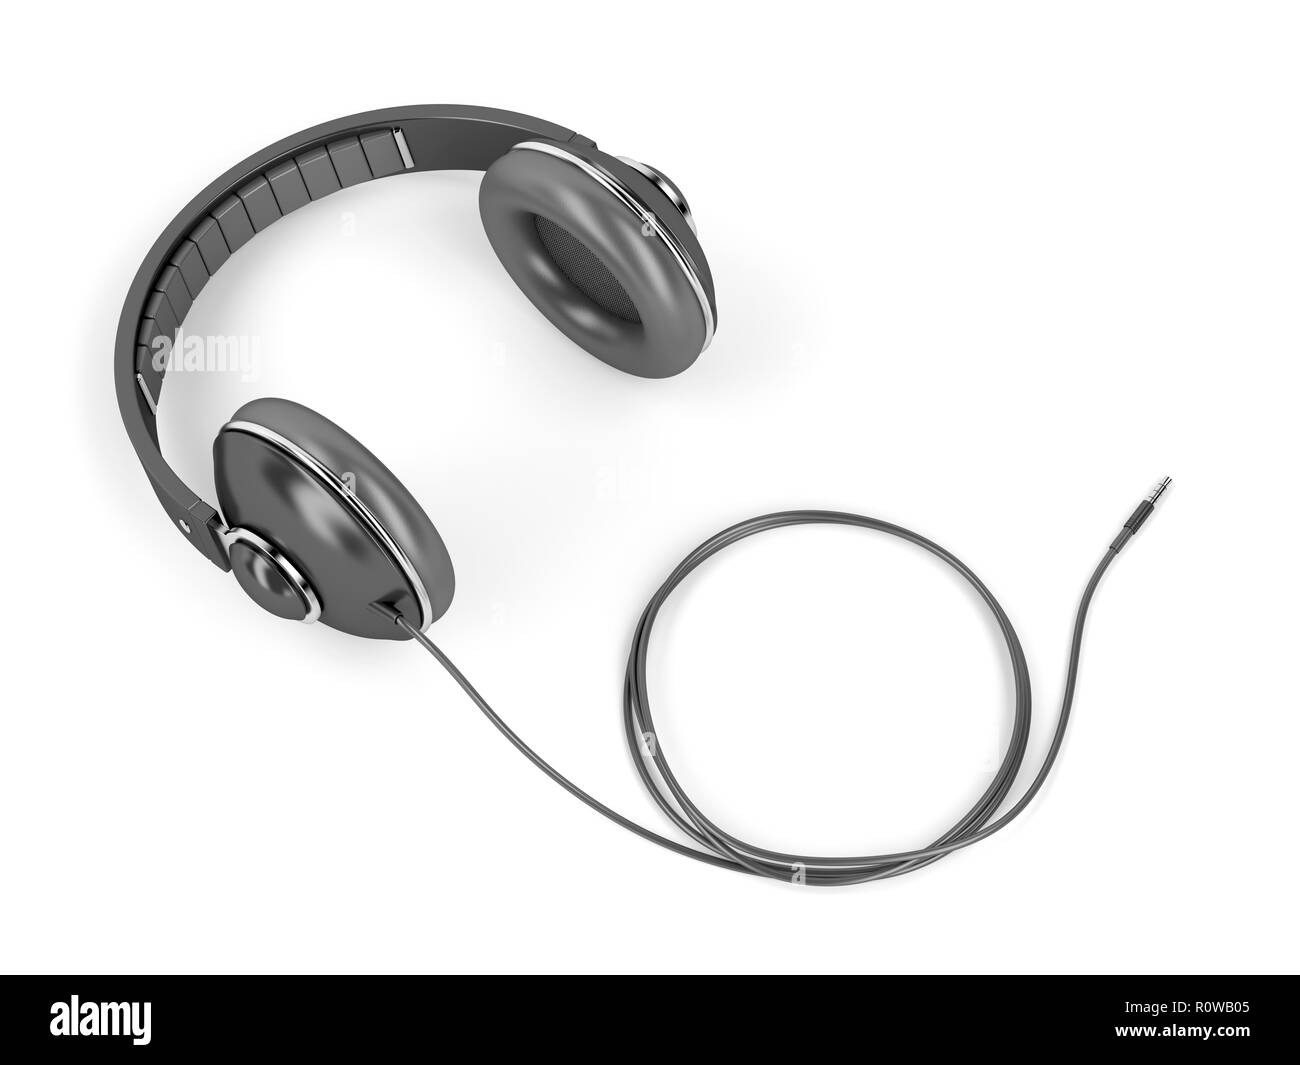 Black wired headphones with 3.5mm headphone connector on white background Stock Photo